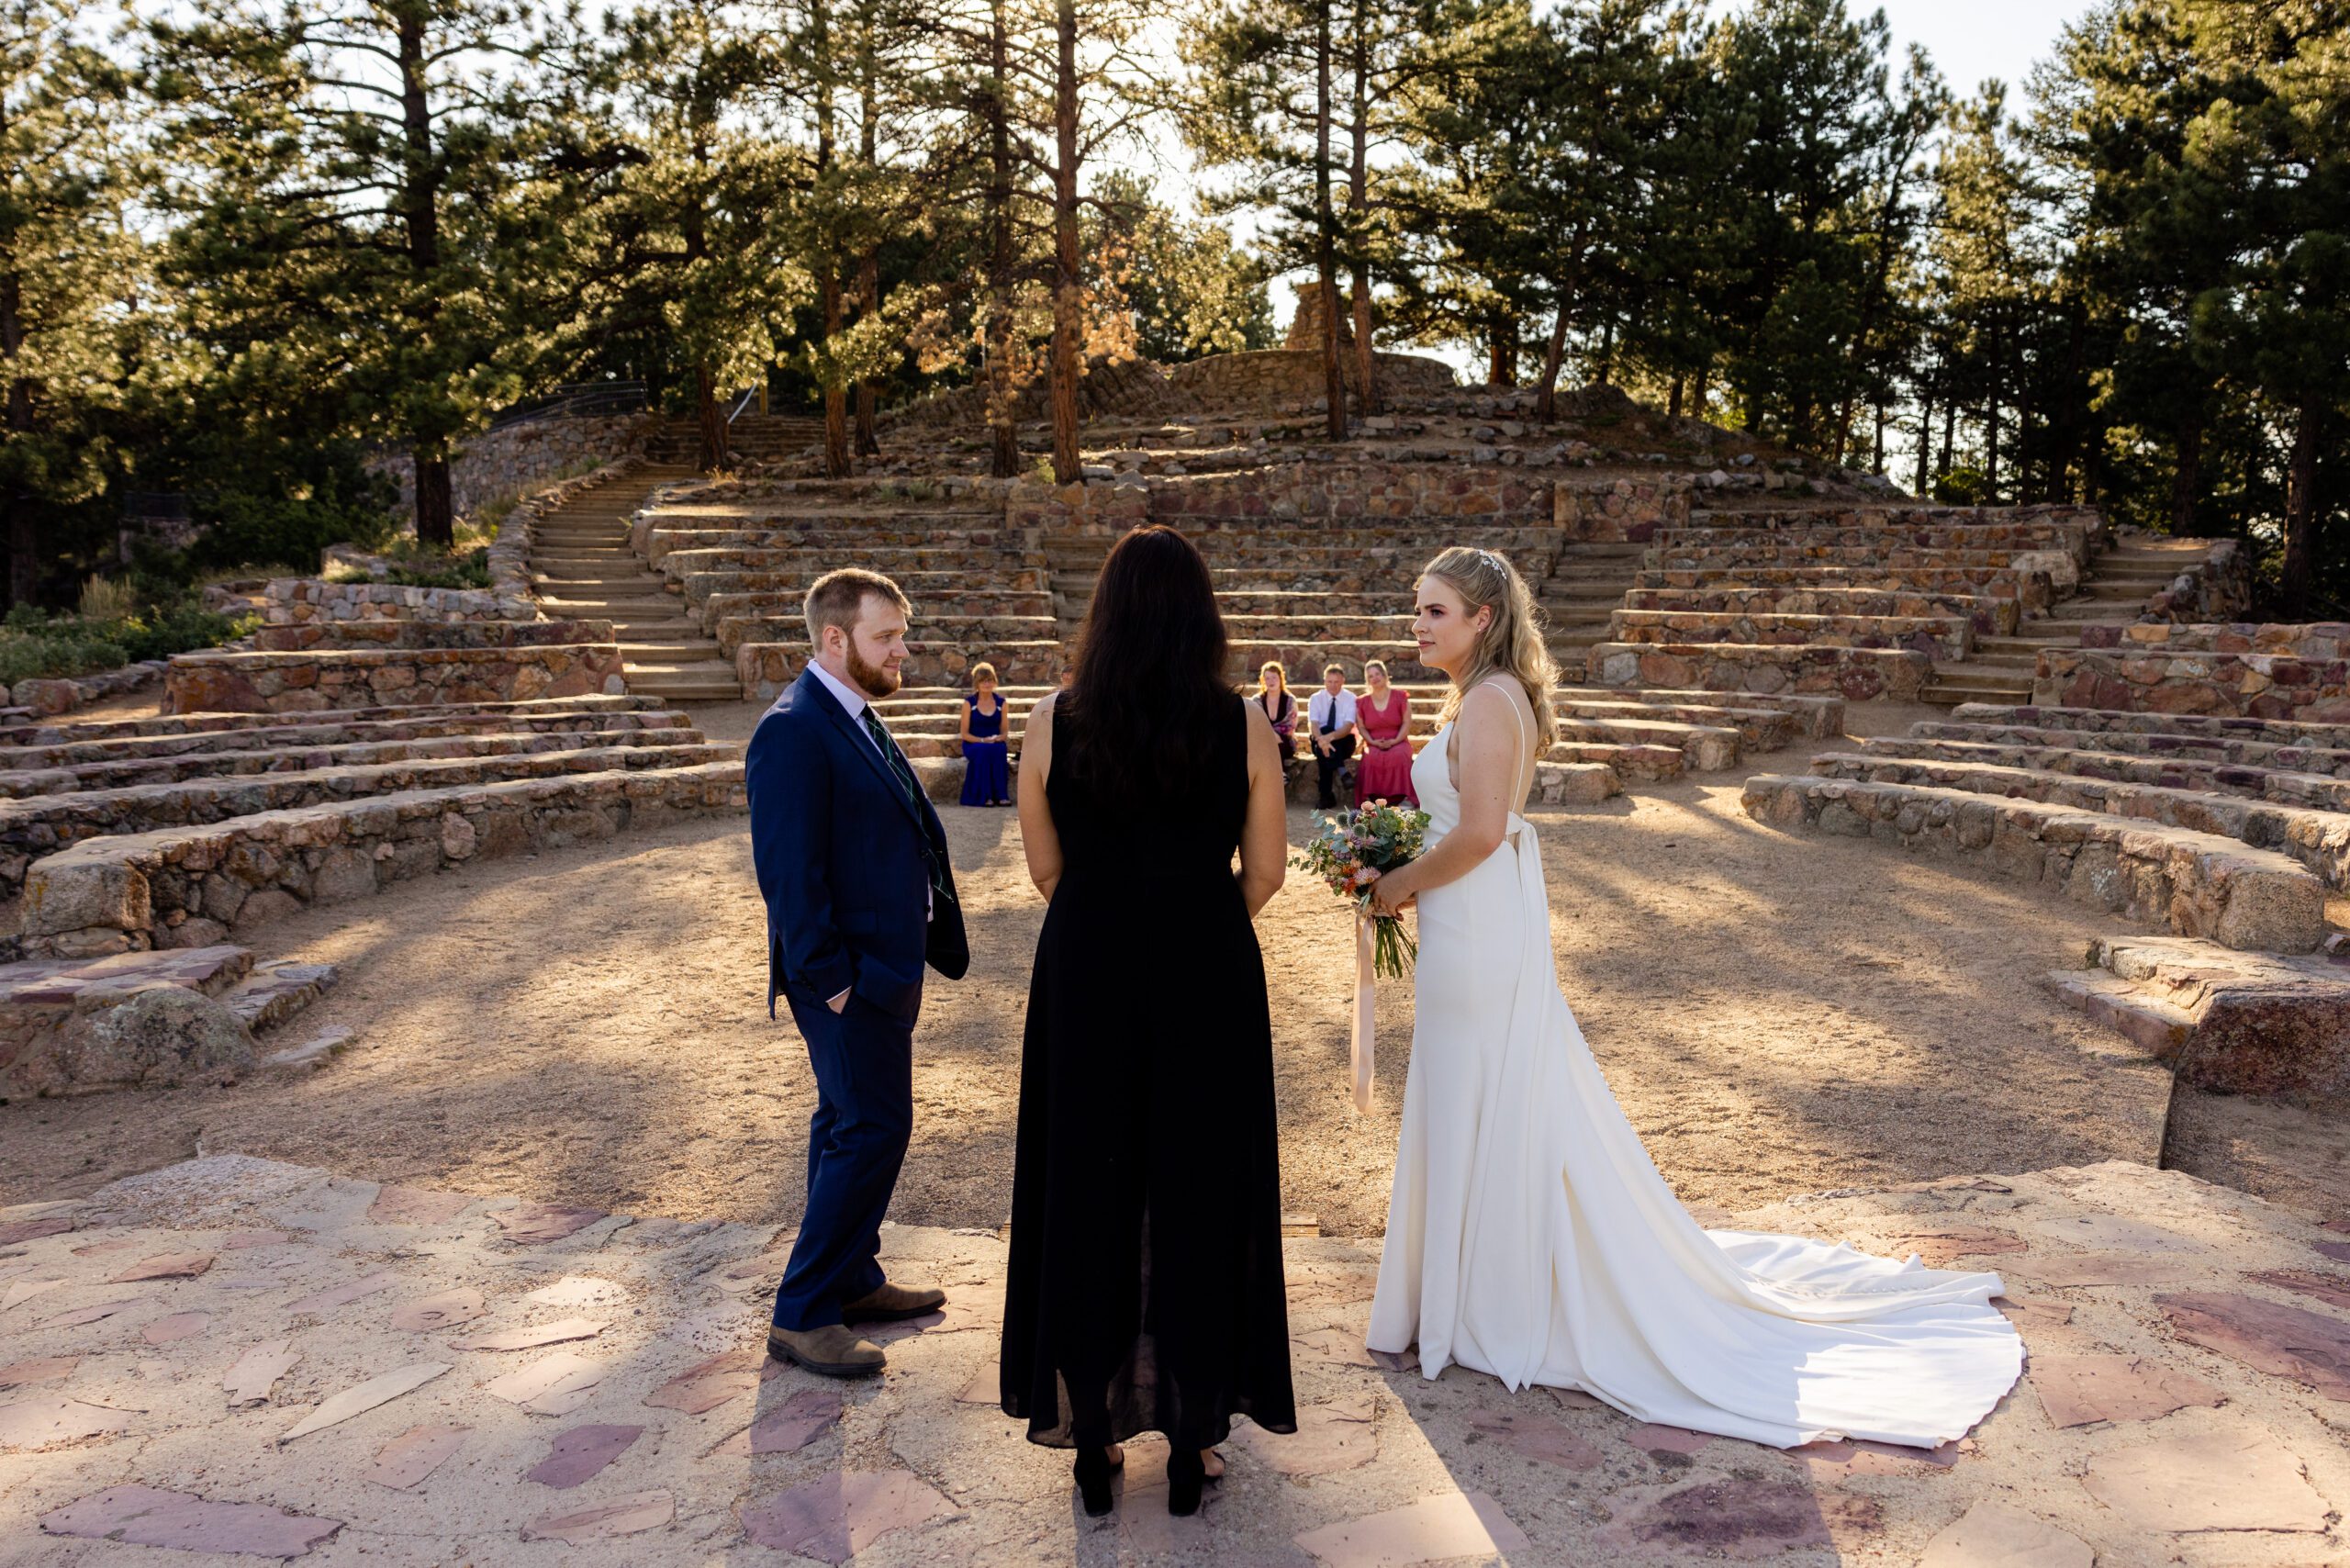 the bride and groom listening to their officiant during their Sunrise Amphitheater wedding.